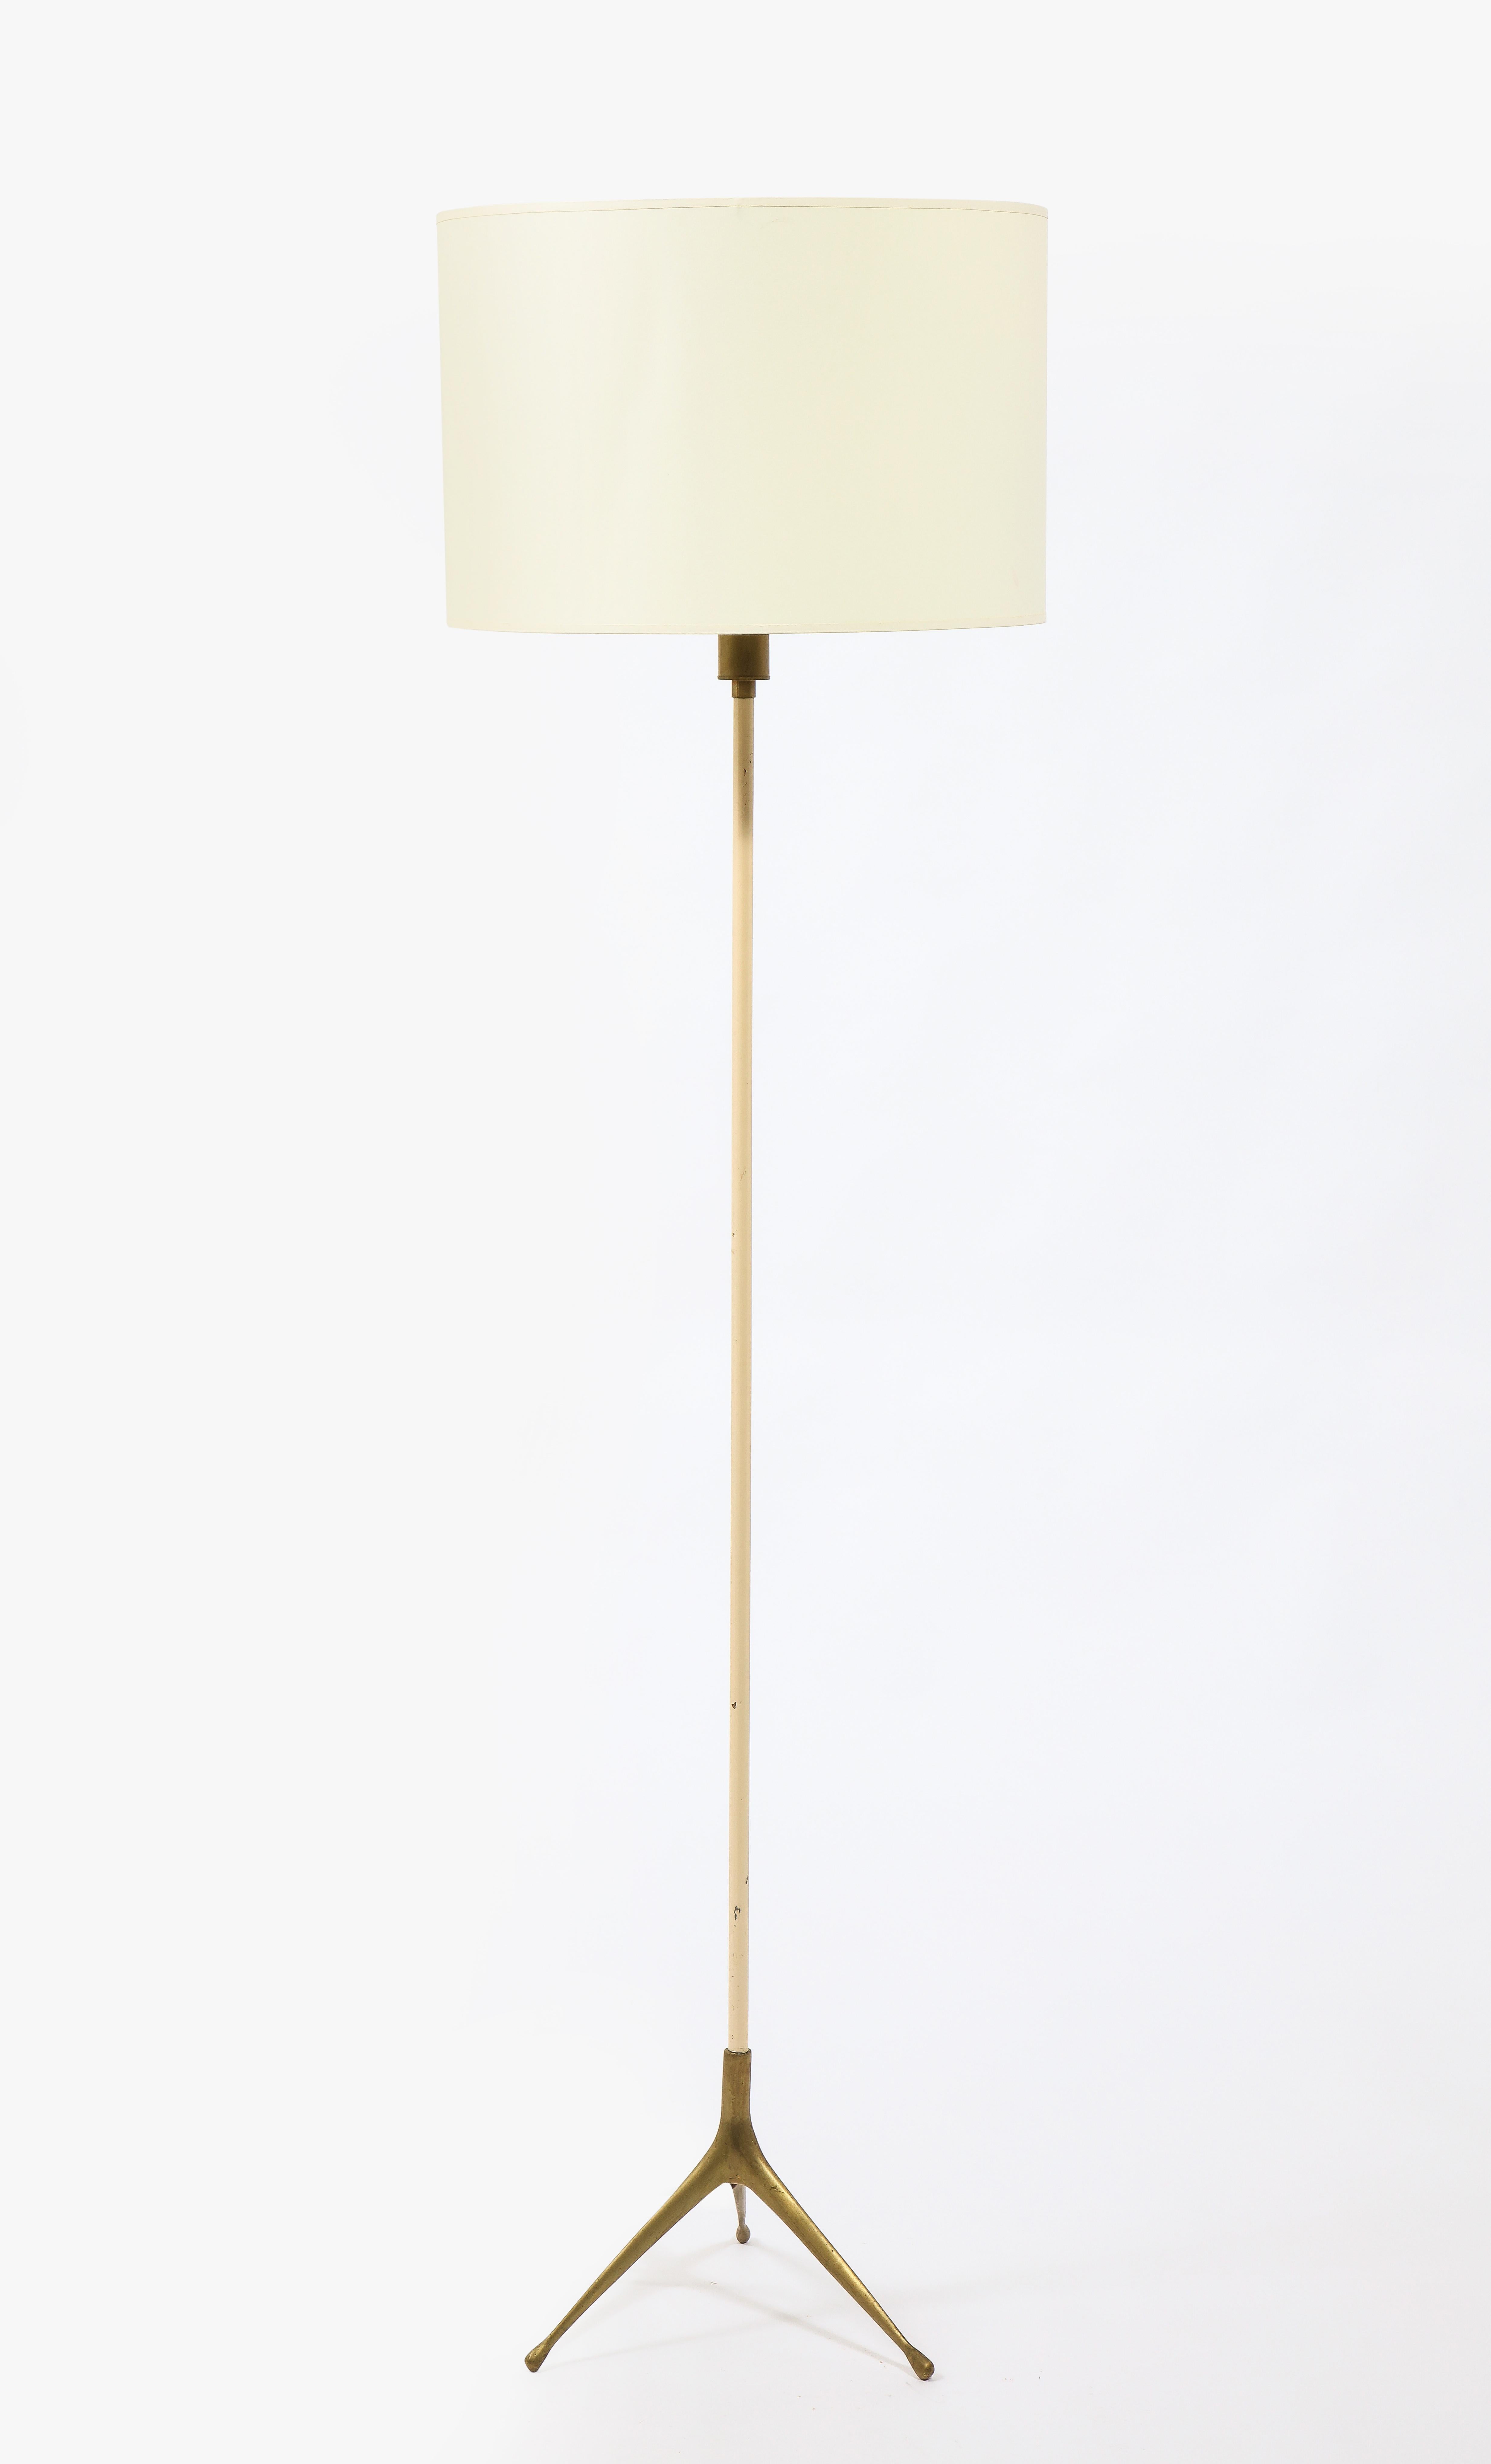 Minimalist brass and white enameled metal floor lamp. 

Shade not included.